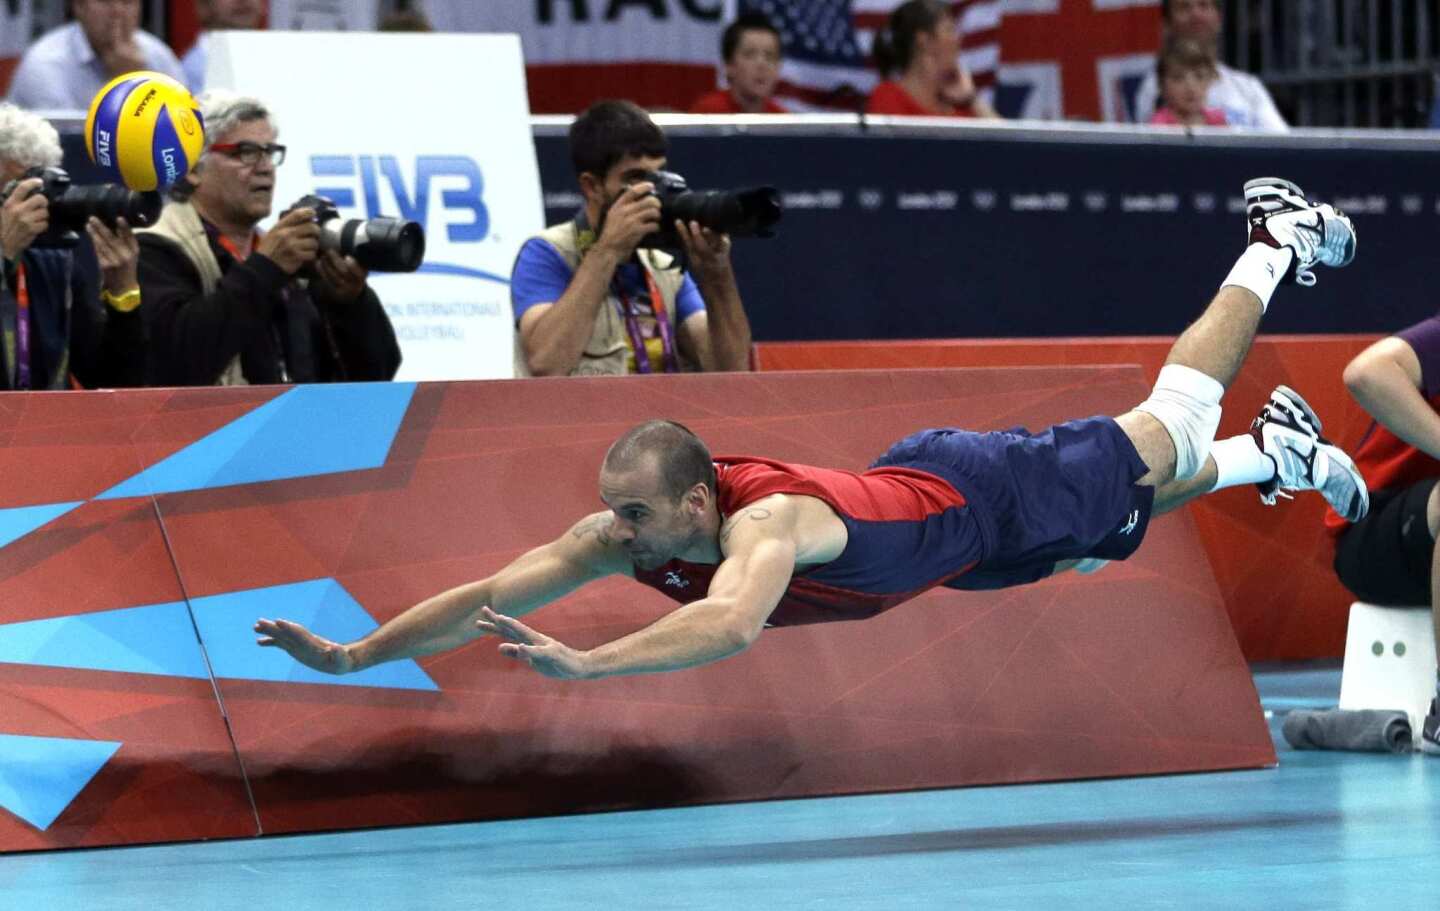 Team USA's Donald Suxho dives but cannot reach the ball during a quarterfinal loss to Italy.